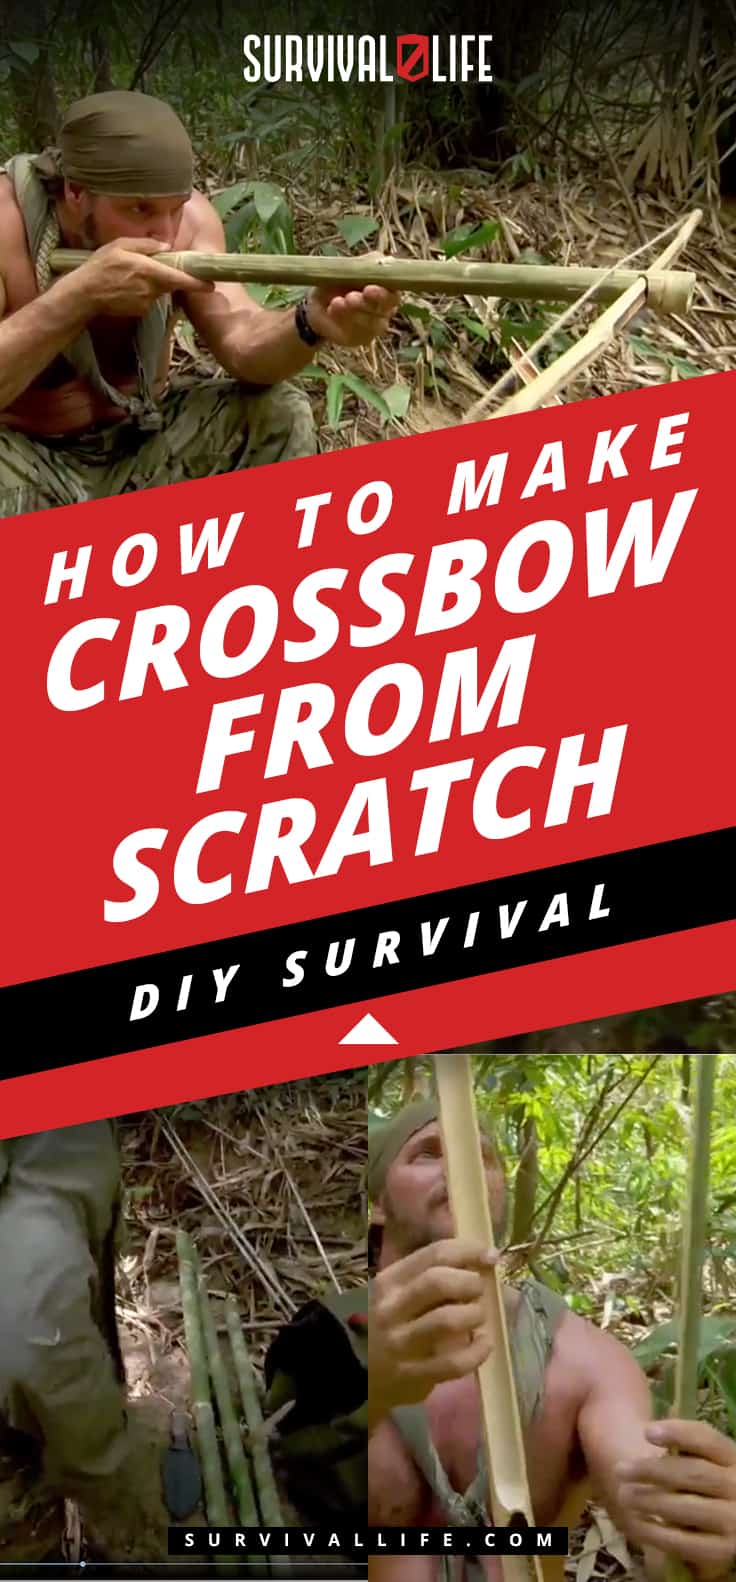 Placard | Crossbow From Scratch | DIY Survival: How To Make A Crossbow From Scratch [Video]